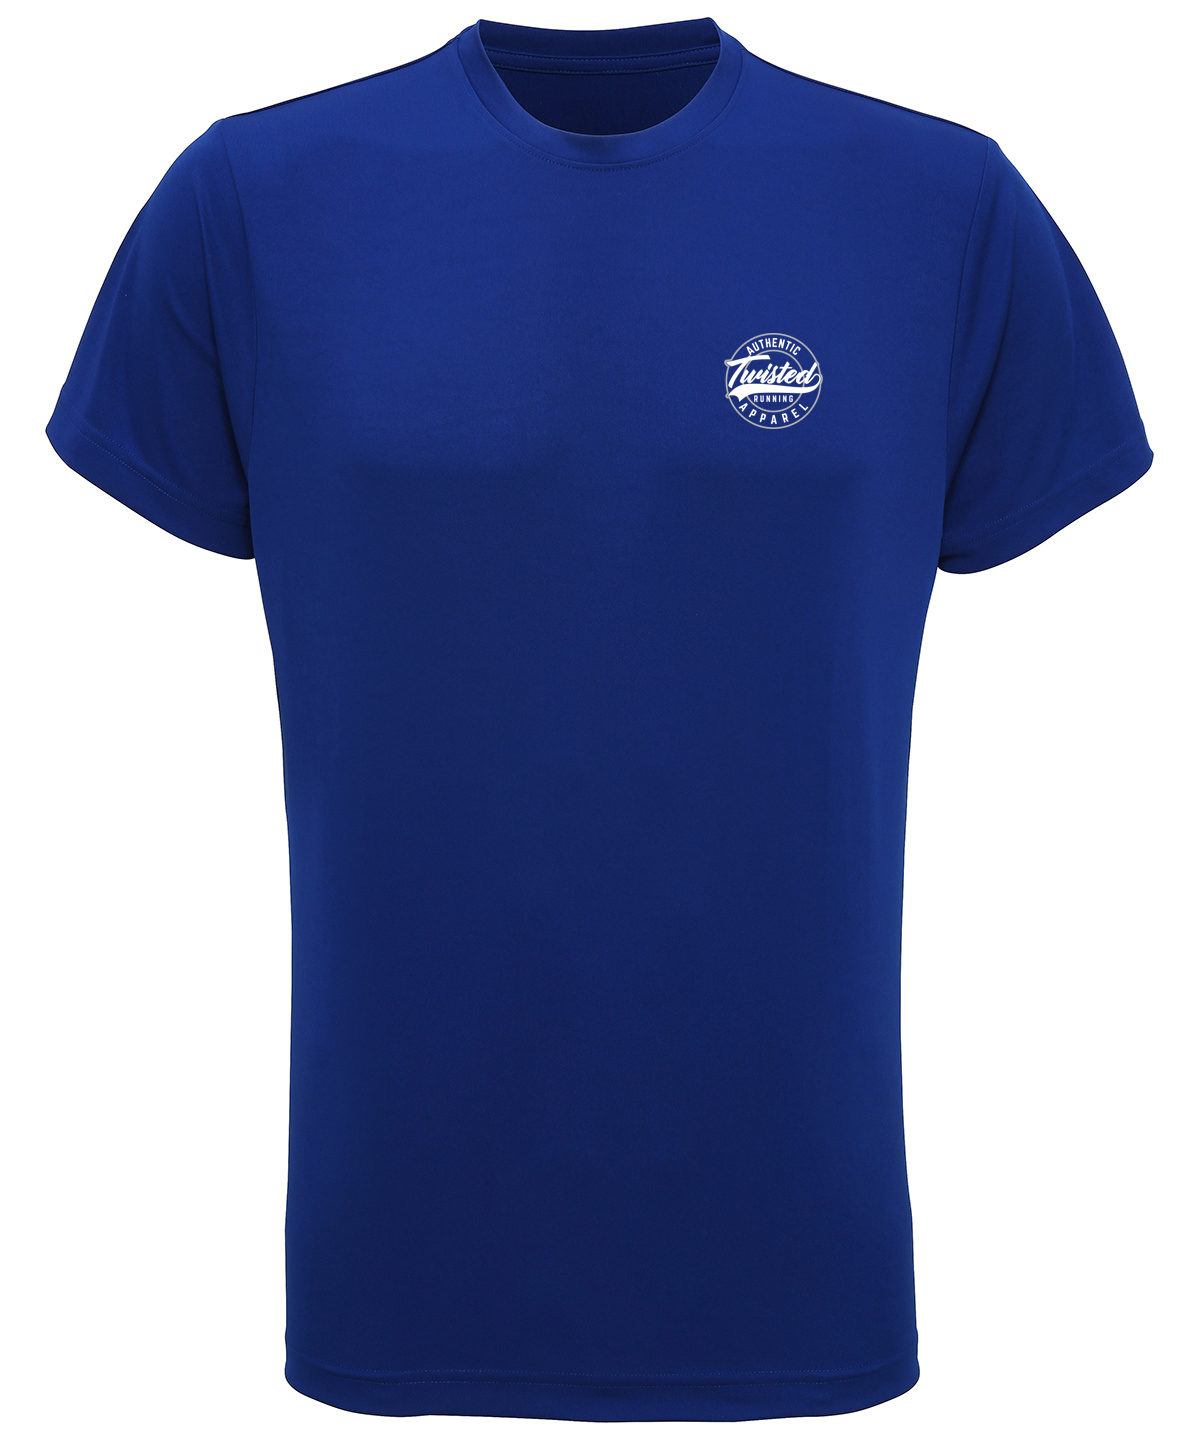 Twisted Running Technical T-Shirt (Unisex)